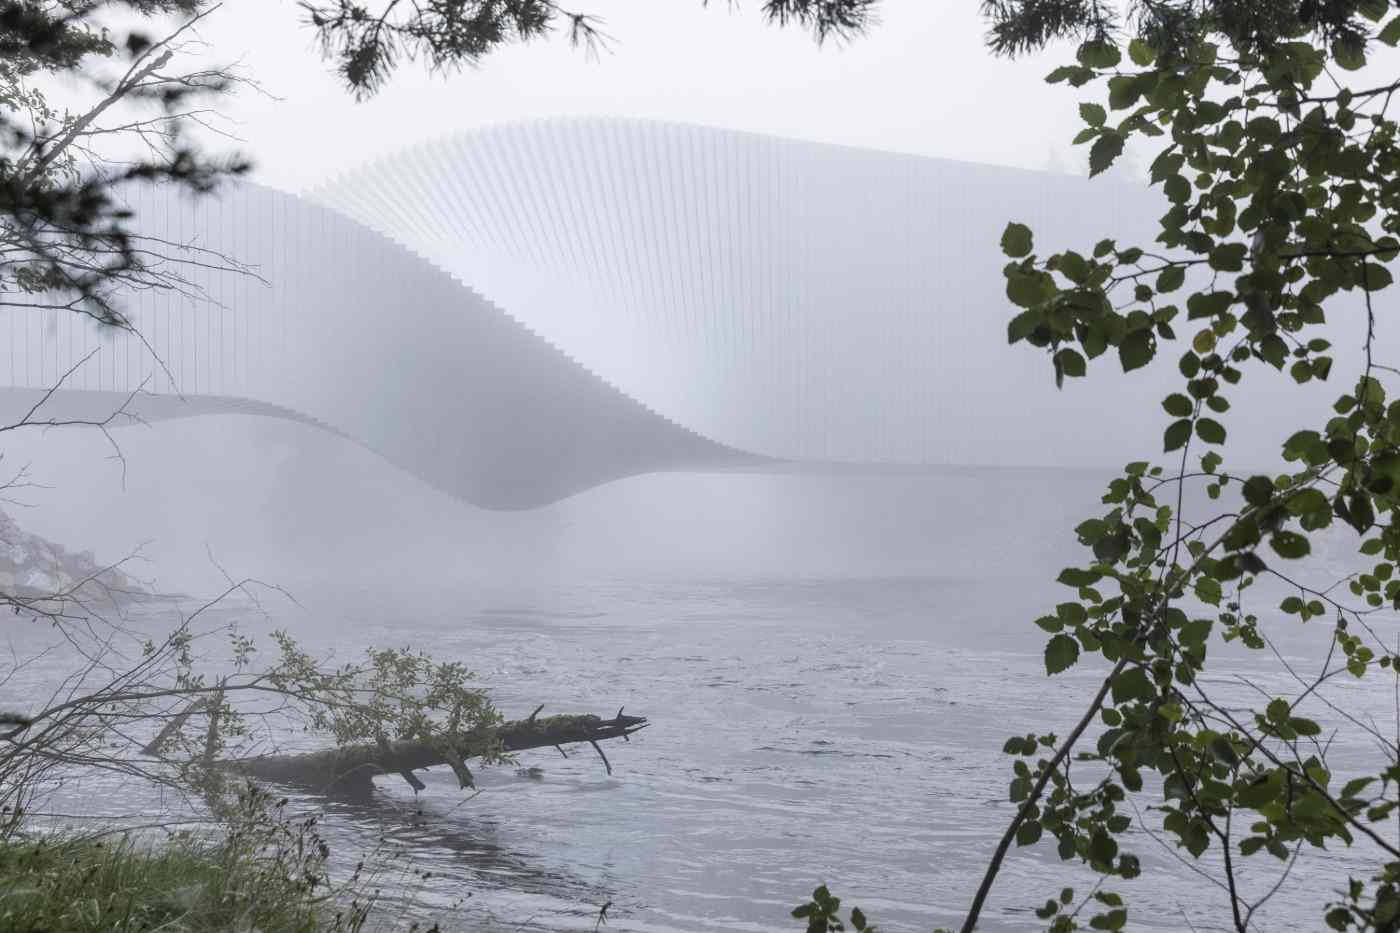 minimalistic shapes and designs built in a fog over a river